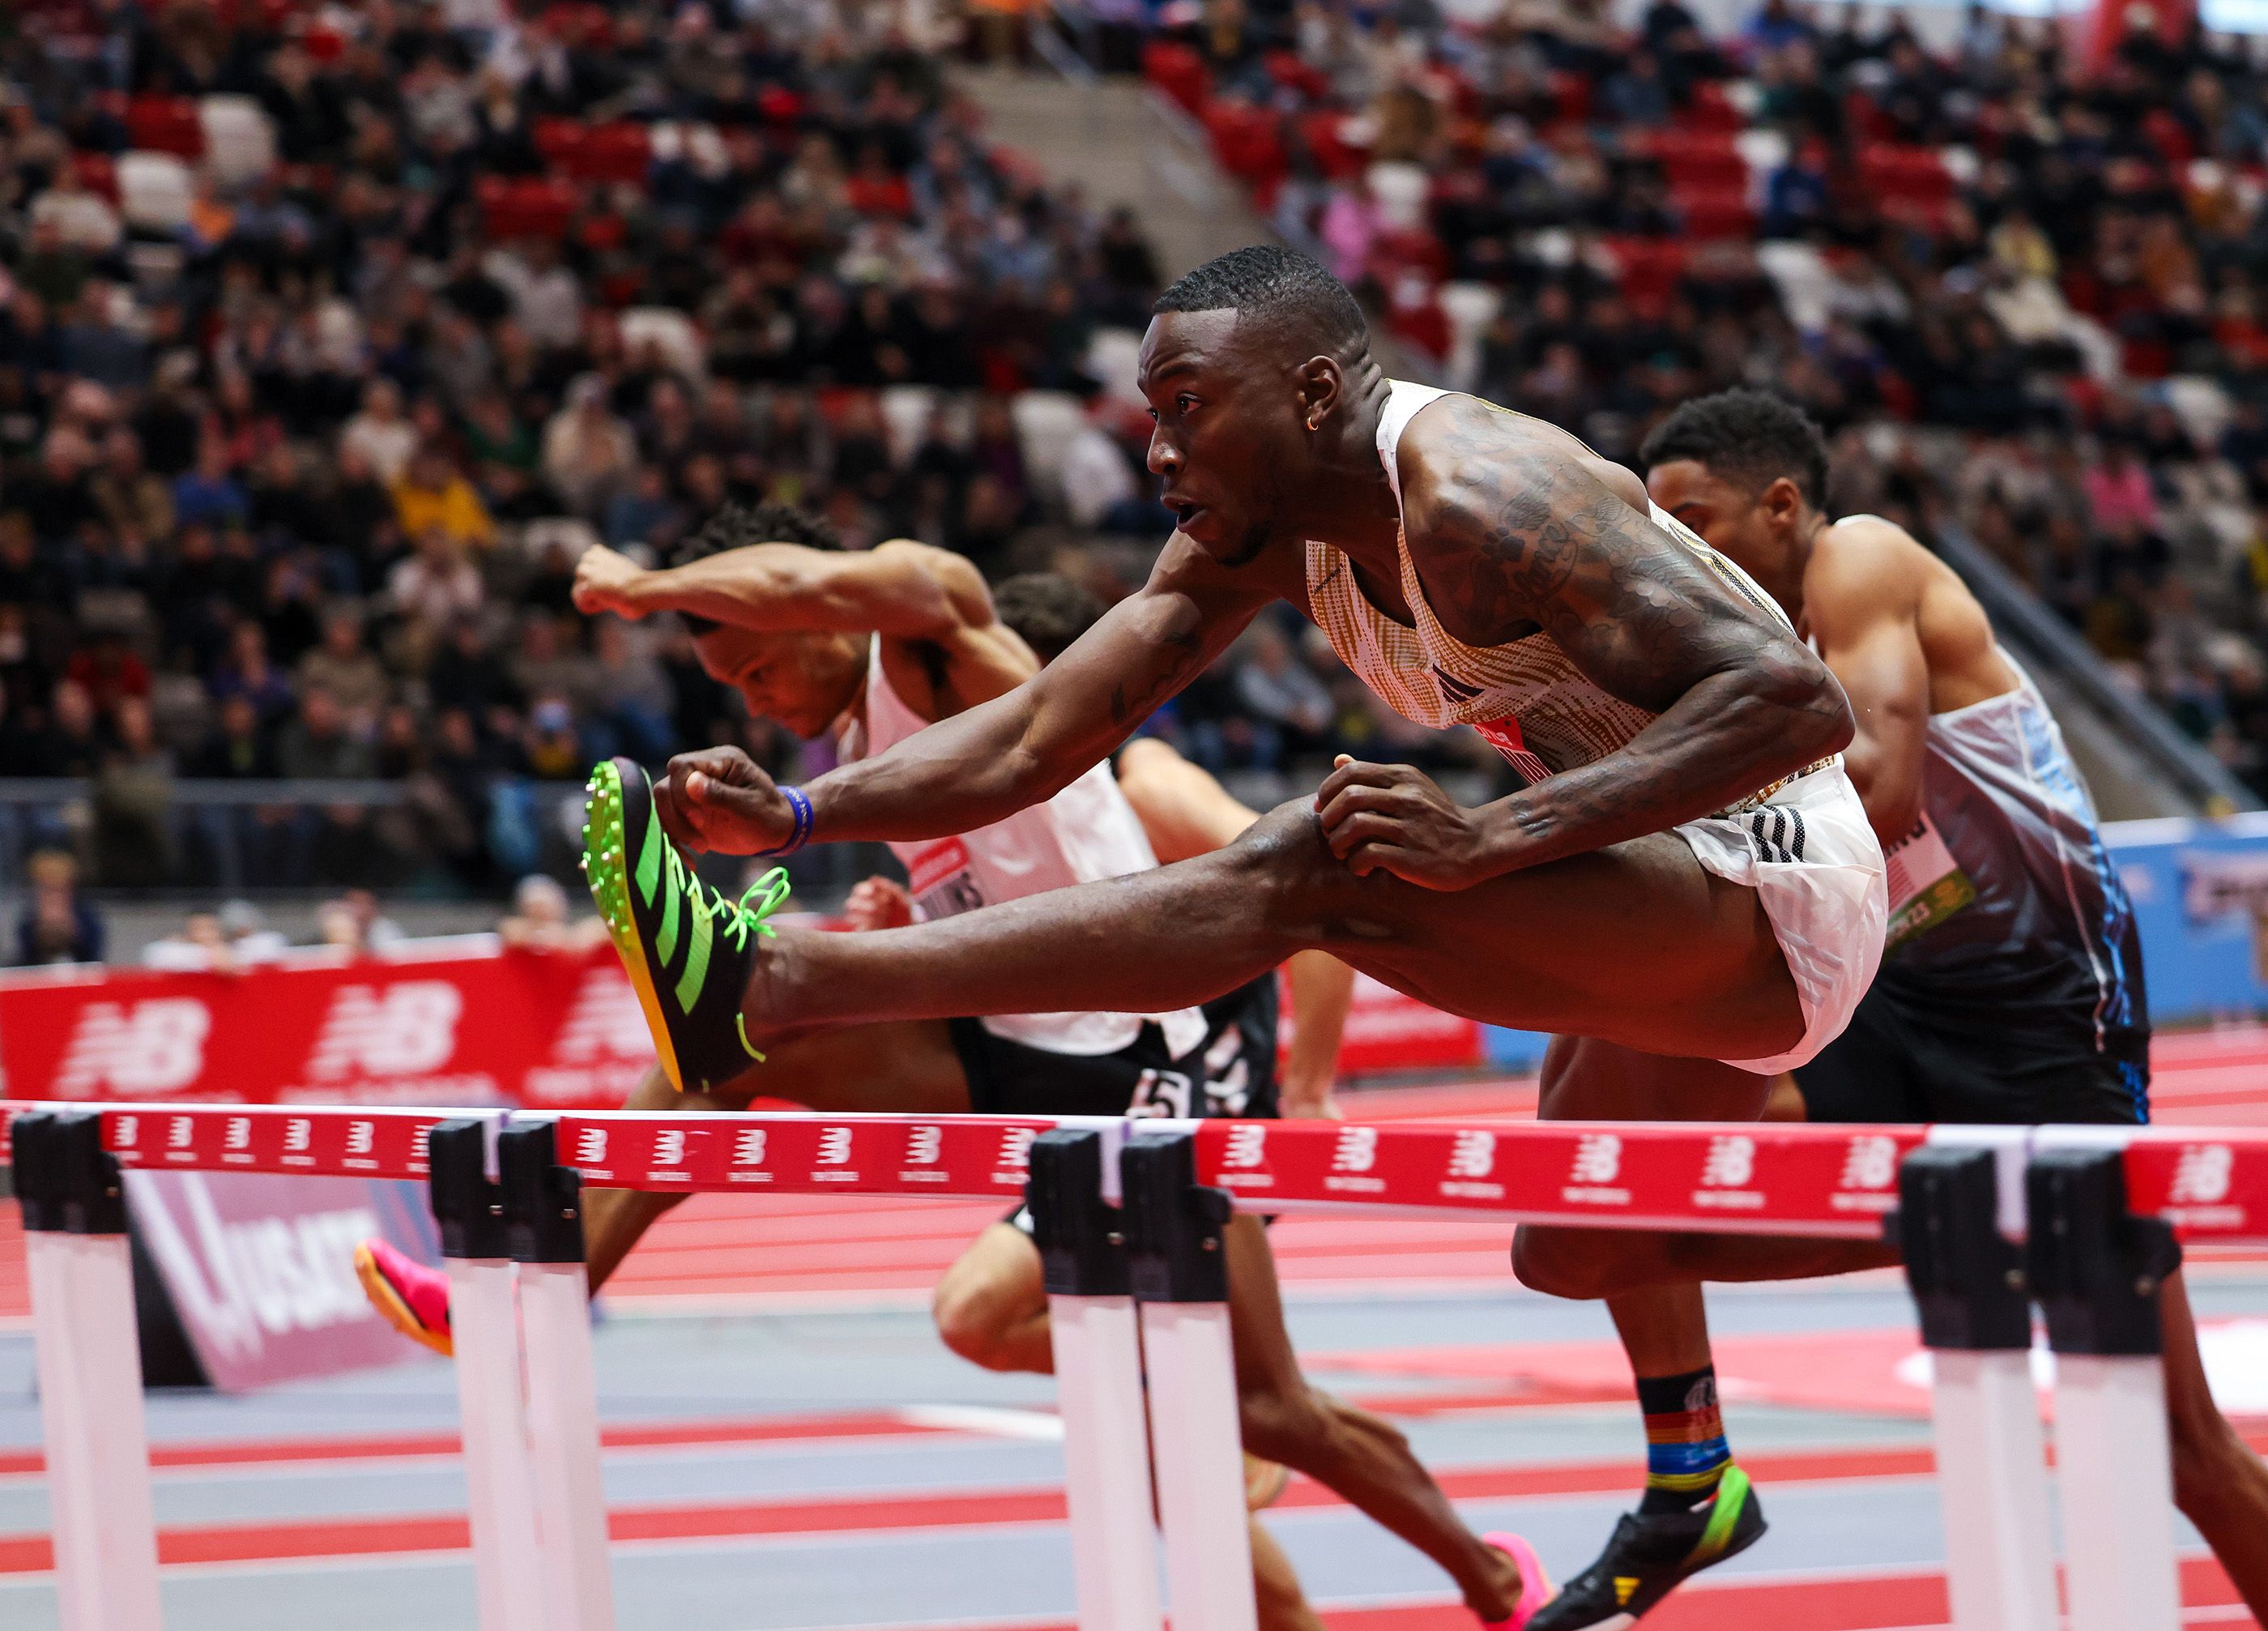 Grant Holloway in action at the New Balance Indoor Grand Prix